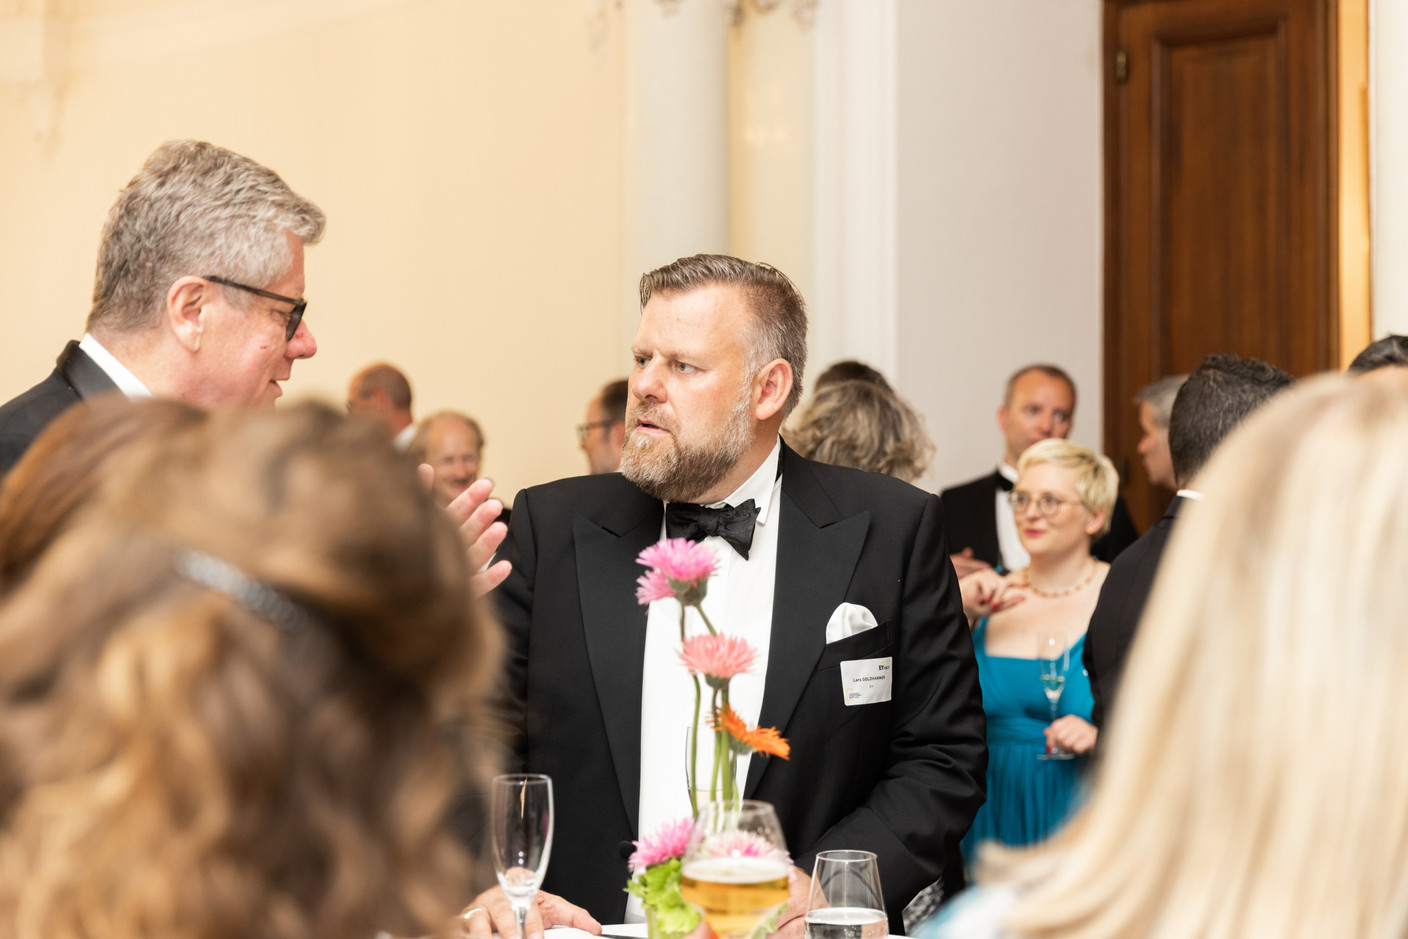 Lars Goldhammer (EY Luxembourg, right) and Claus Mansfeldt (SwanCap, LPEA, left) at a gala dinner to launch EY Luxembourg's 2023 attractiveness survey, held at the Cercle Cité on 15 June. Photo: Romain Gamba/Maison Moderne